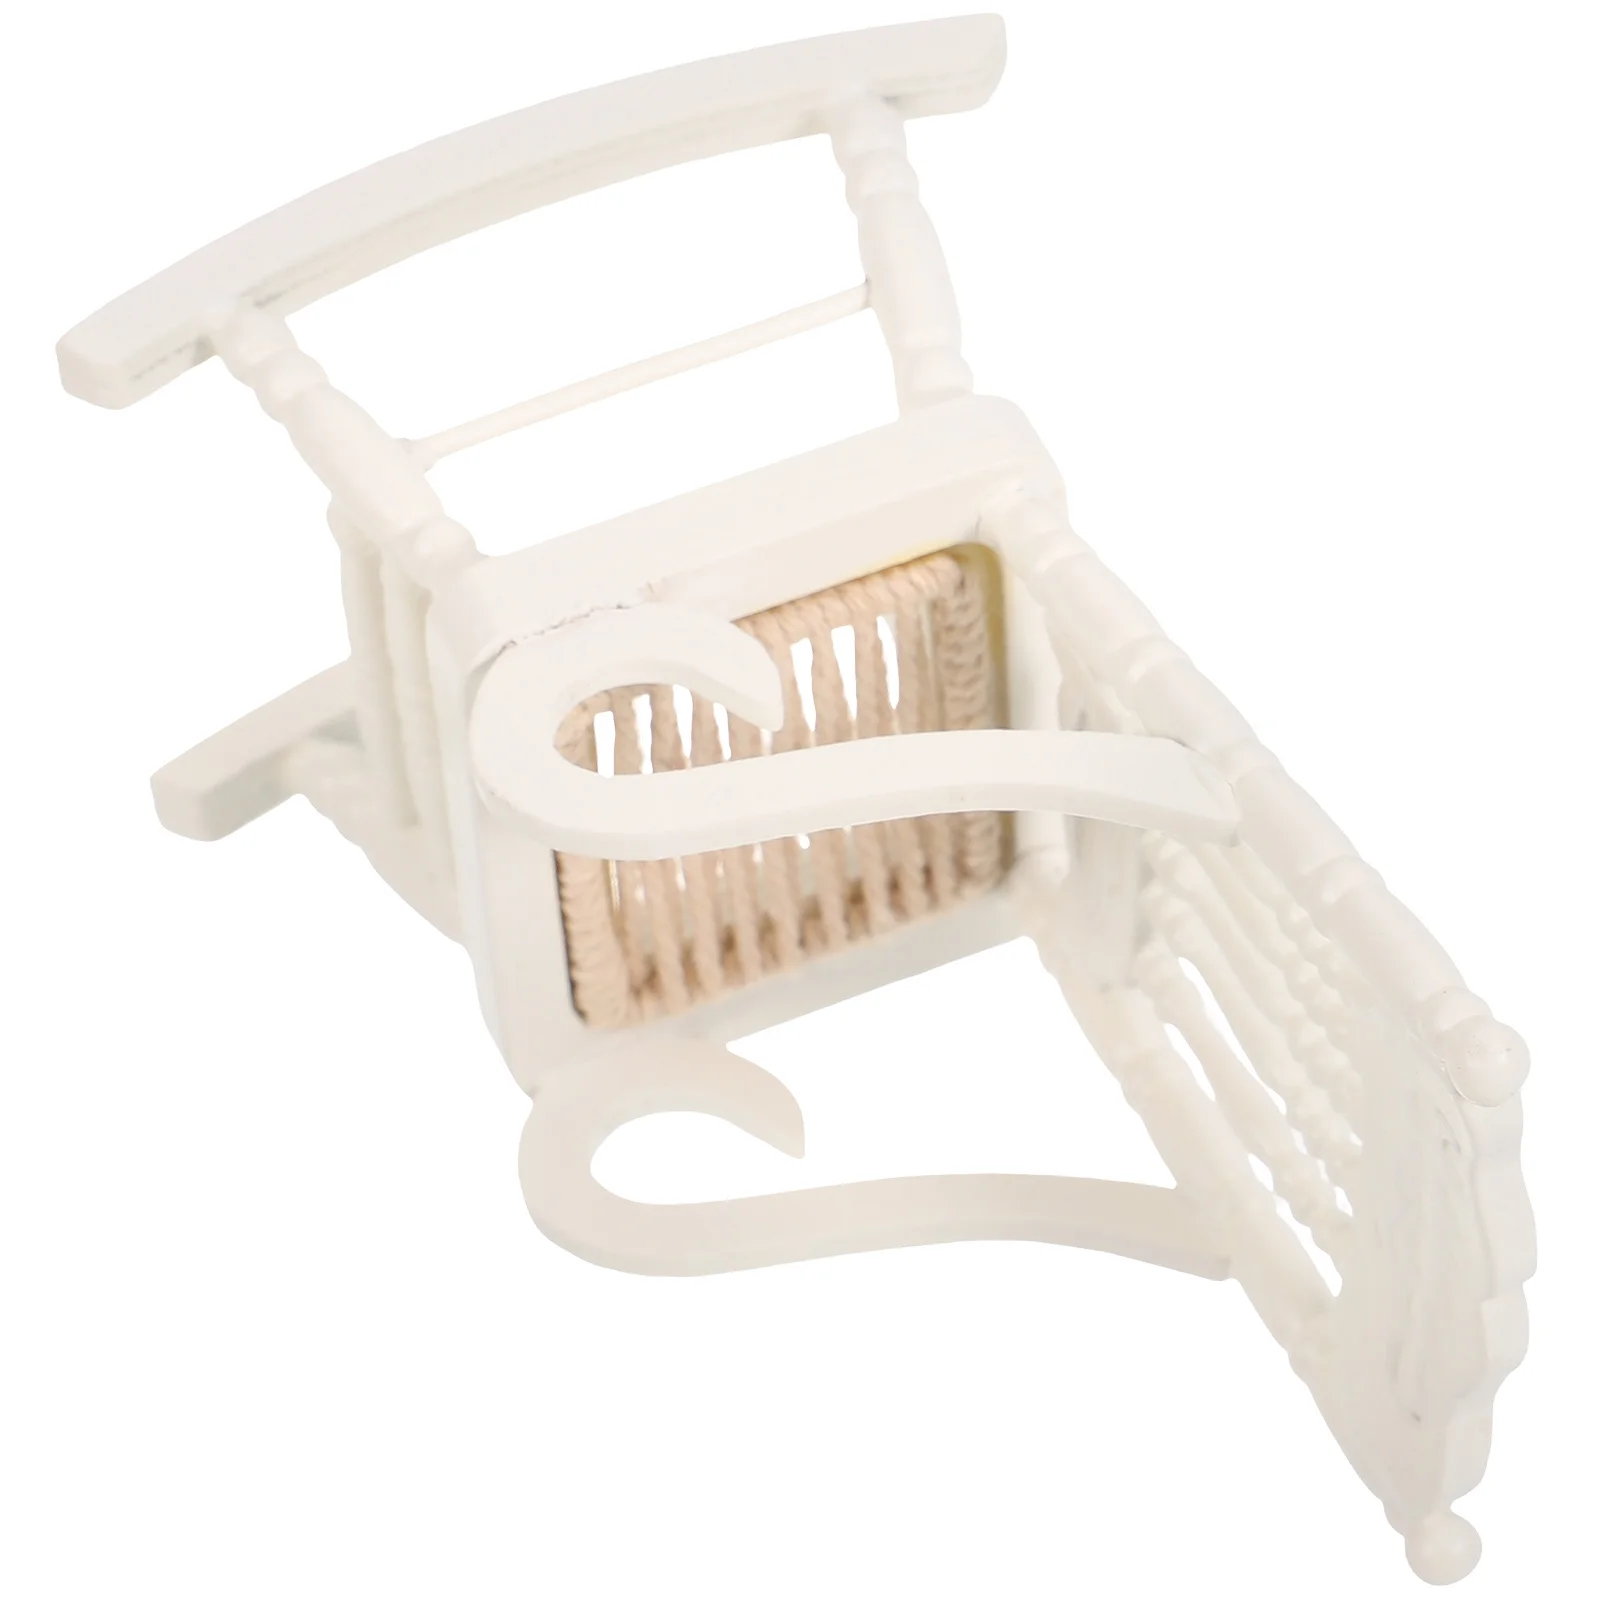 

Wooden Dollhouse Furniture Set Miniature Rocking Chair Model for Girls and Boys Age 3+ (White)